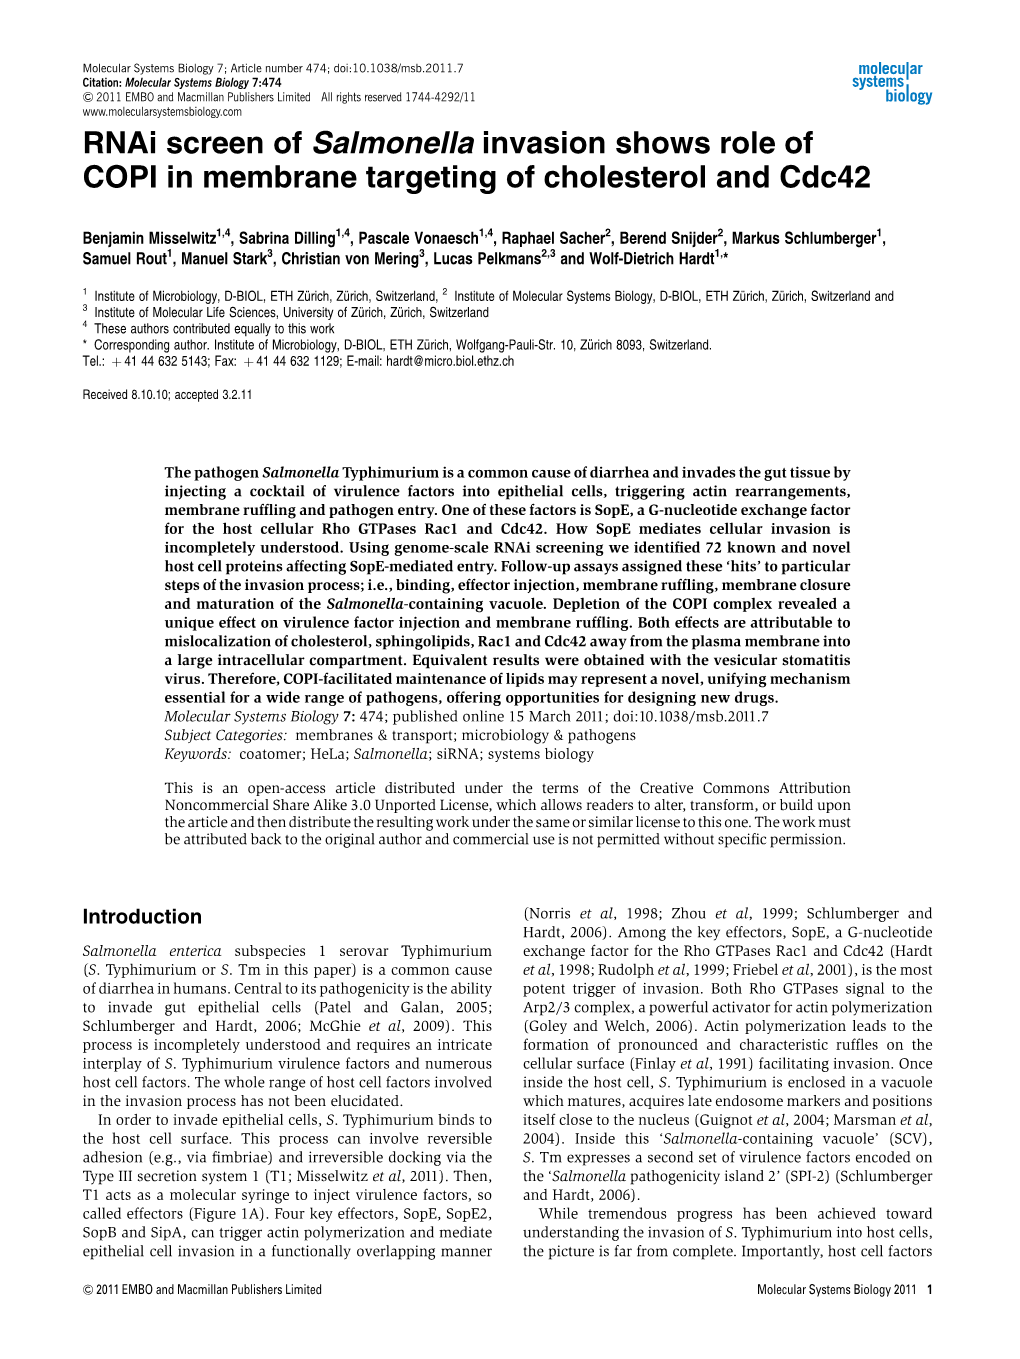 Rnai Screen of Salmonella Invasion Shows Role of COPI in Membrane Targeting of Cholesterol and Cdc42